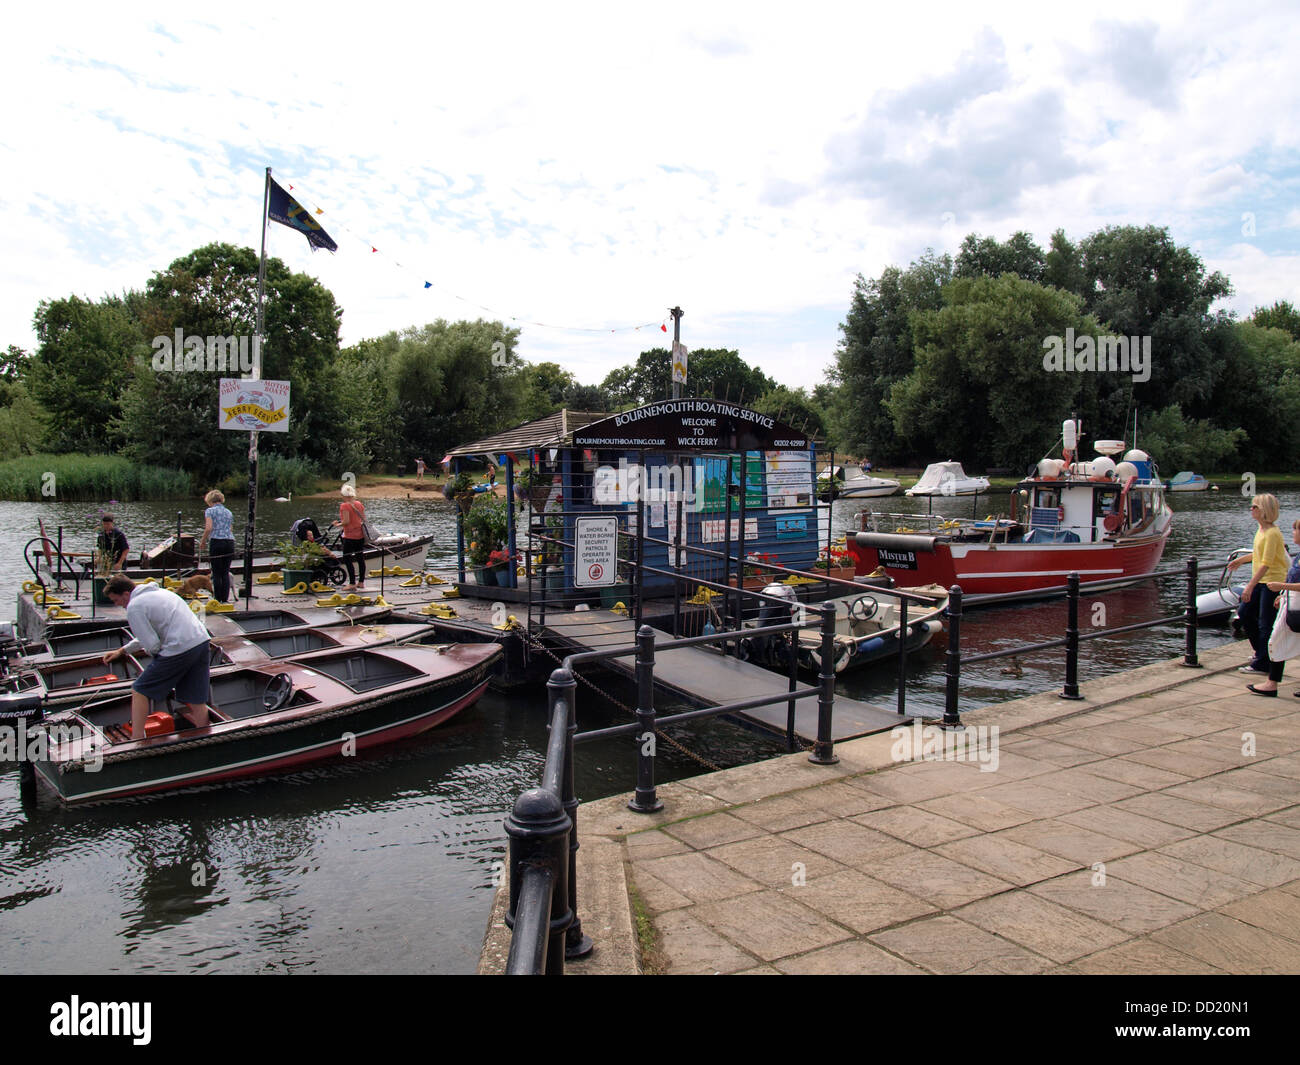 Wick Ferry runs across the River Stour between Wick village and Christchurch, Dorset, UK 2013 Stock Photo